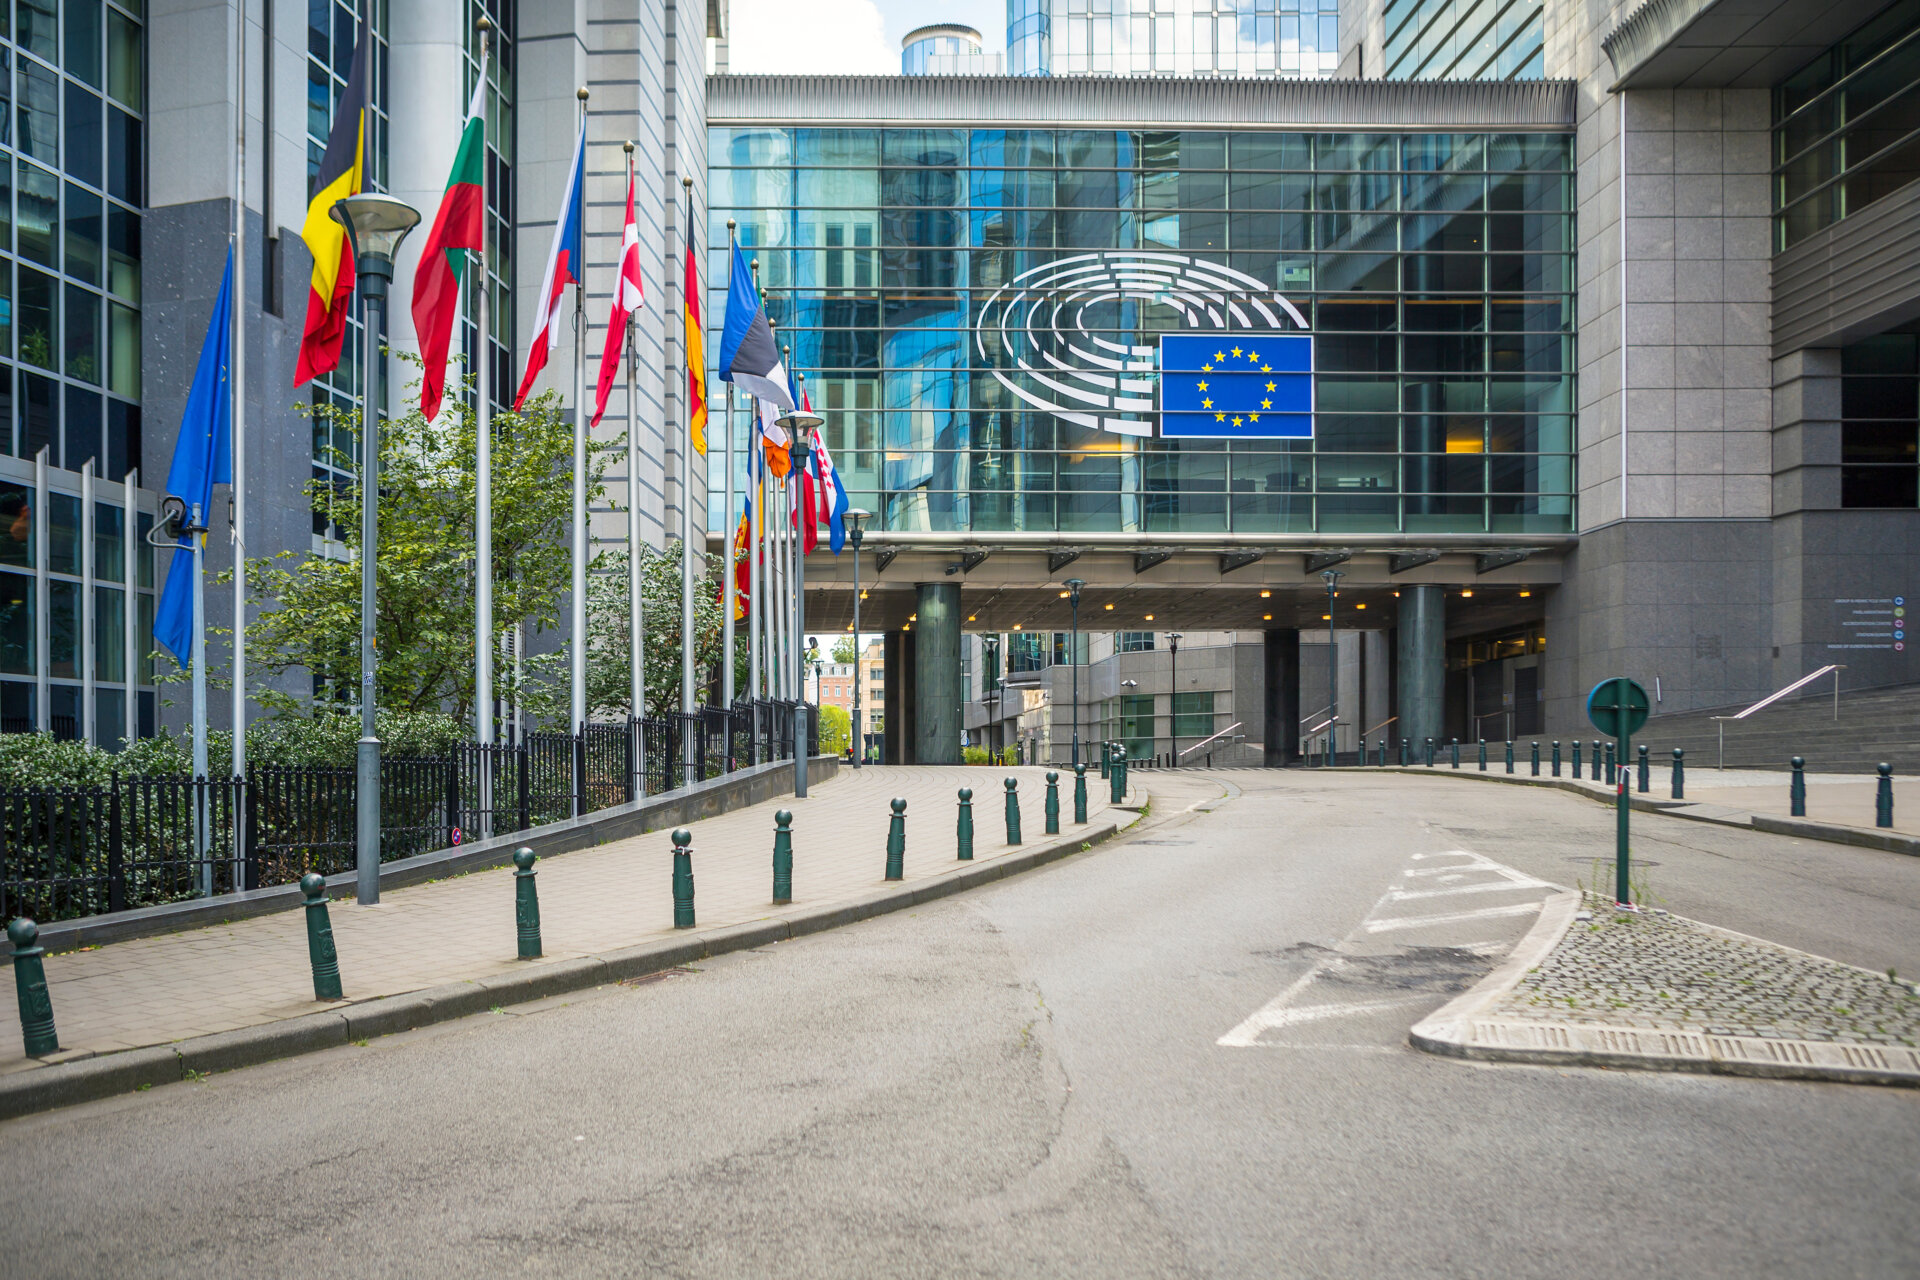 European Parliament offices and European flags in Brussels, Belg